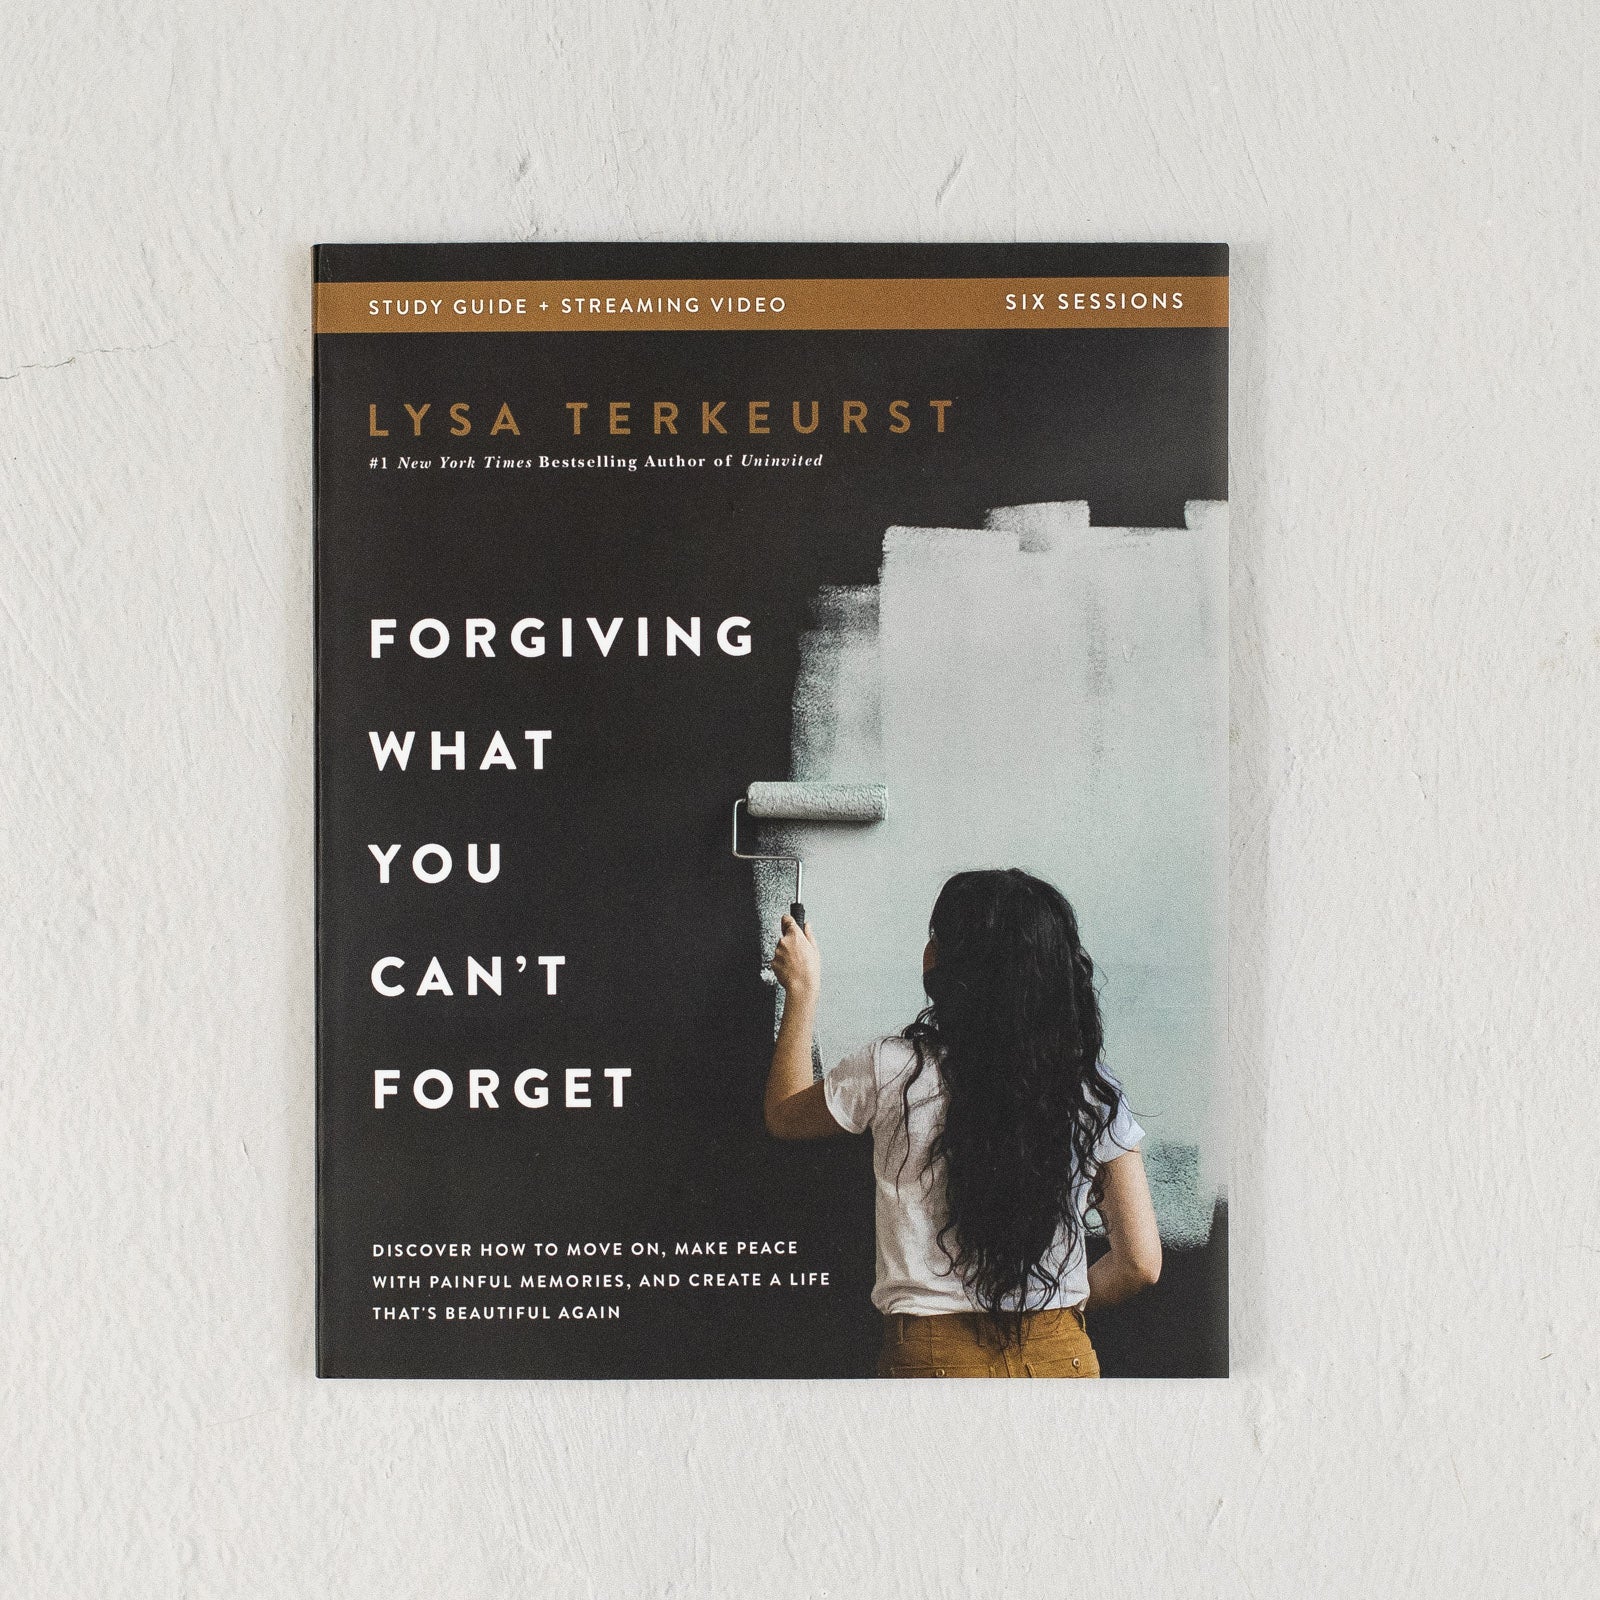 Forgiving What You Can't Forget Study Guide + Streaming Video